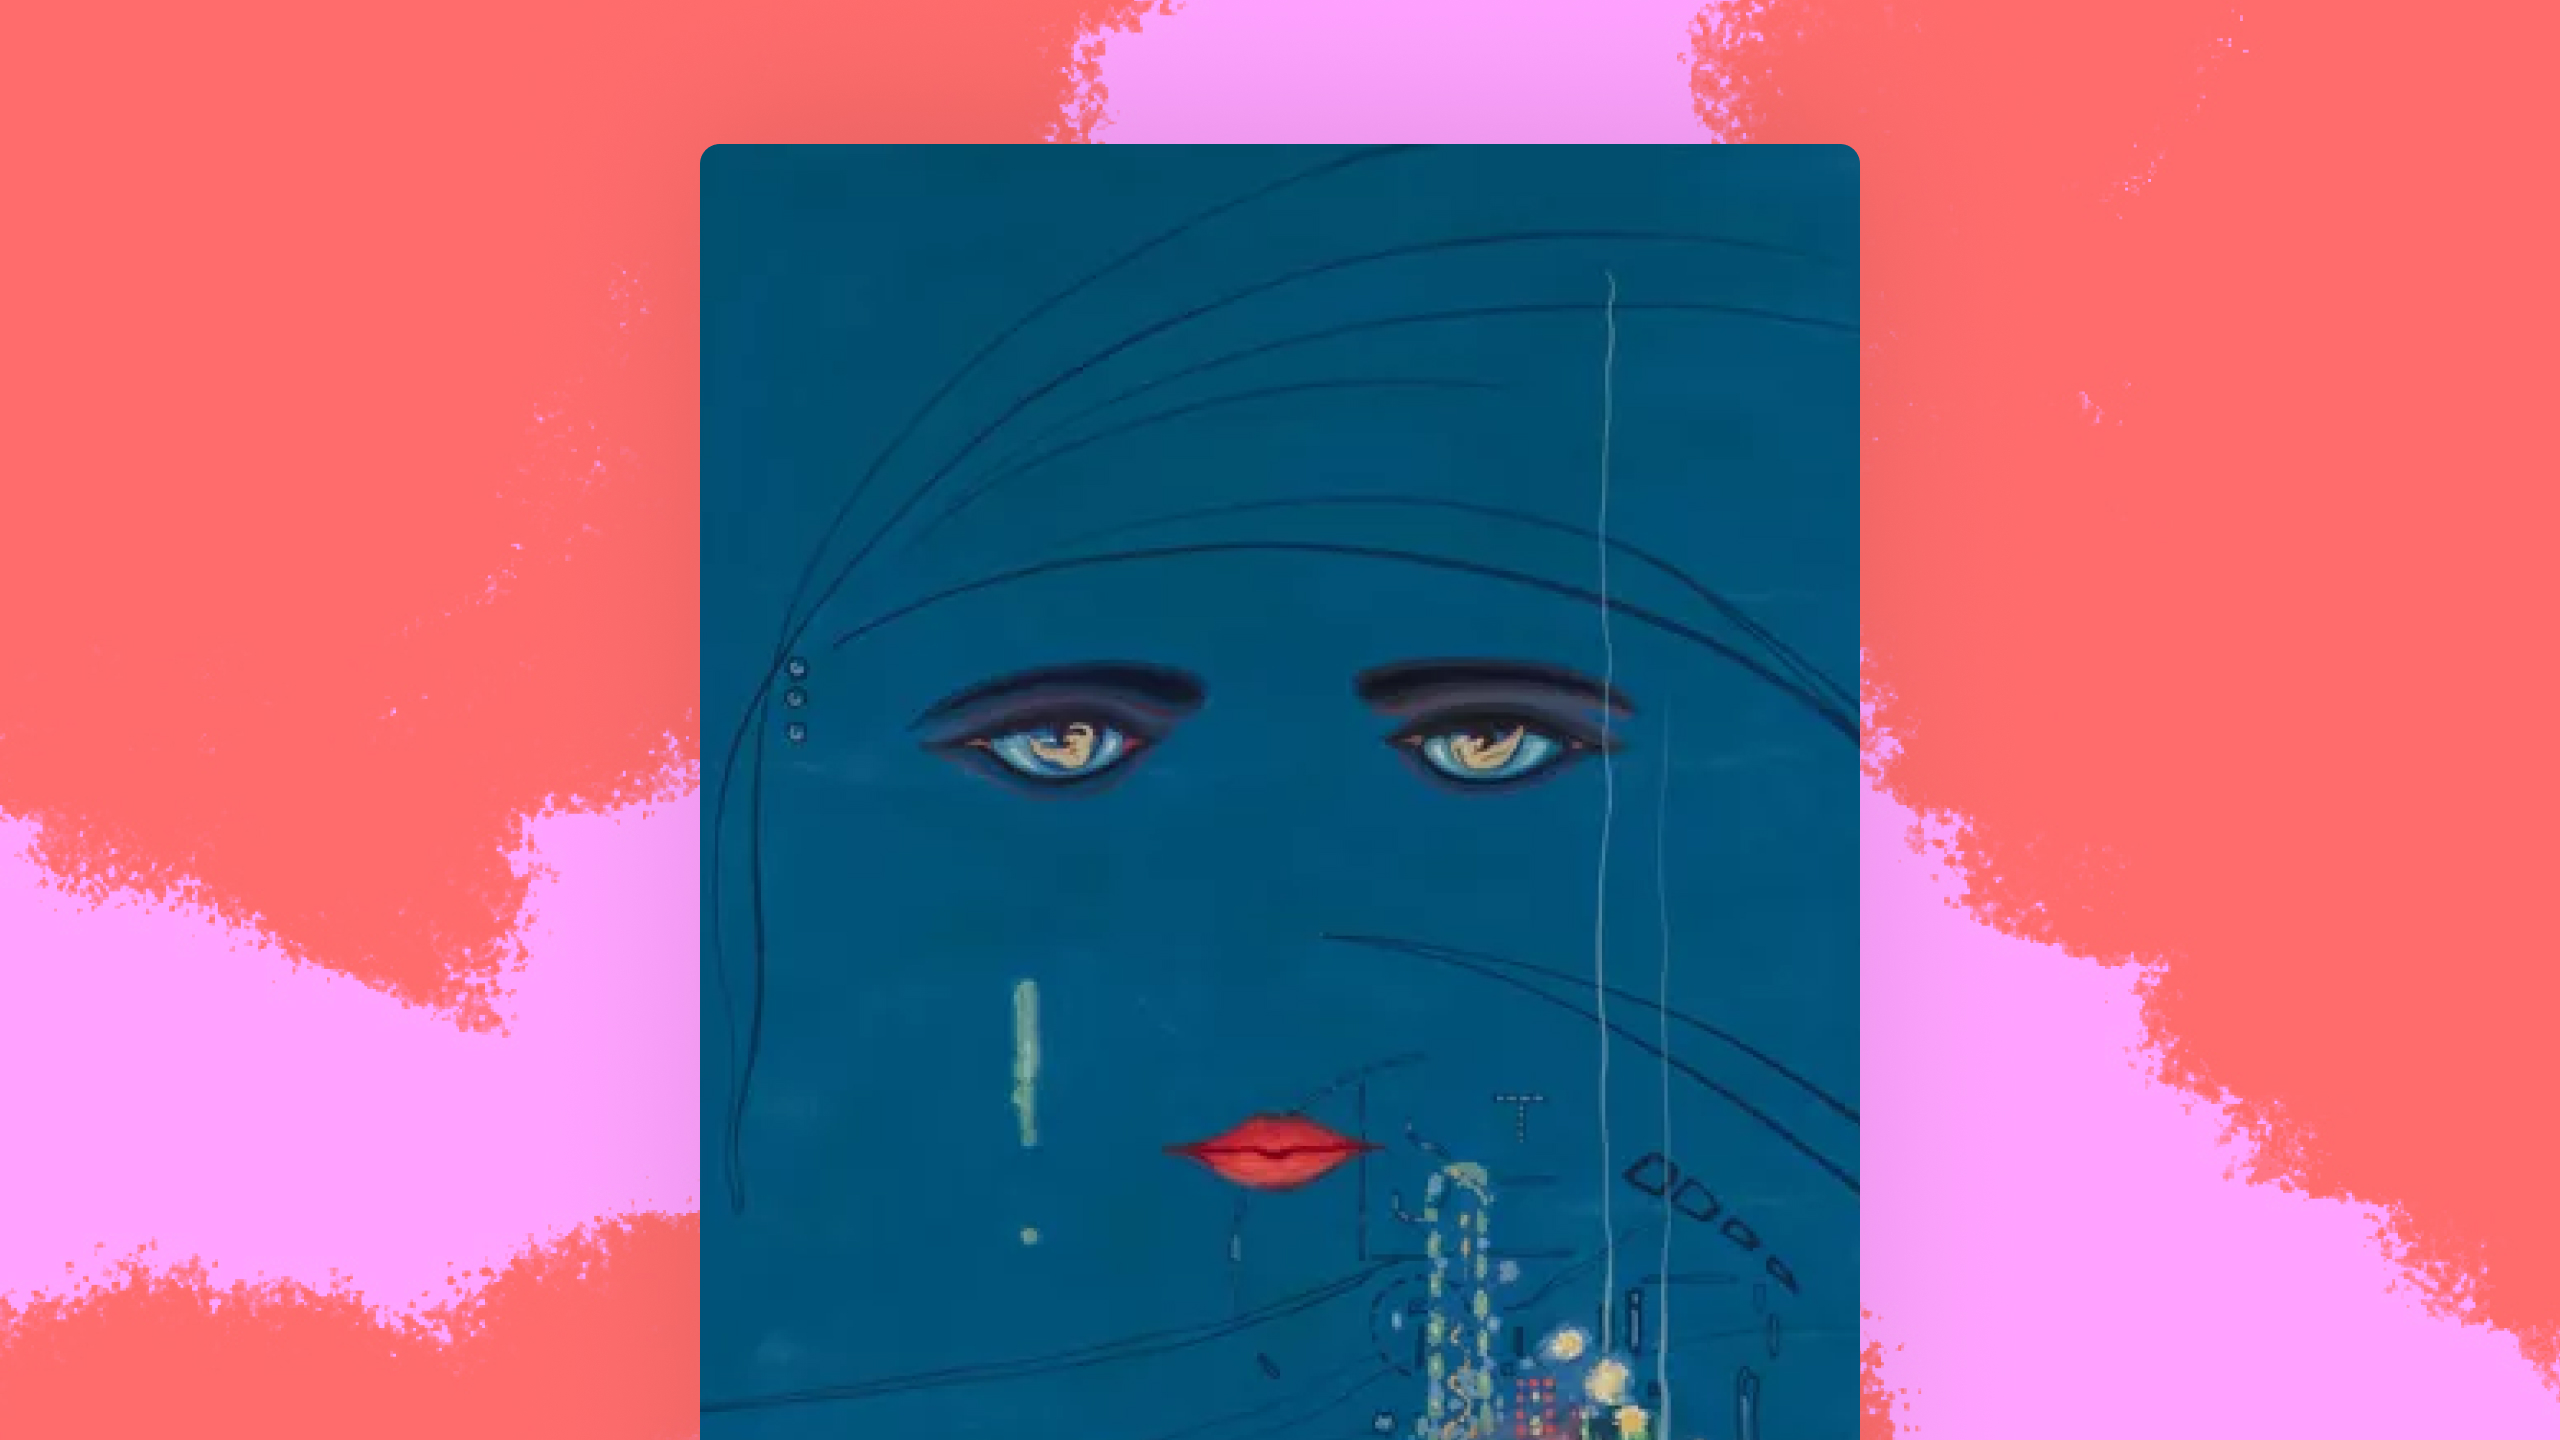 the great gatsby book cover wallpaper